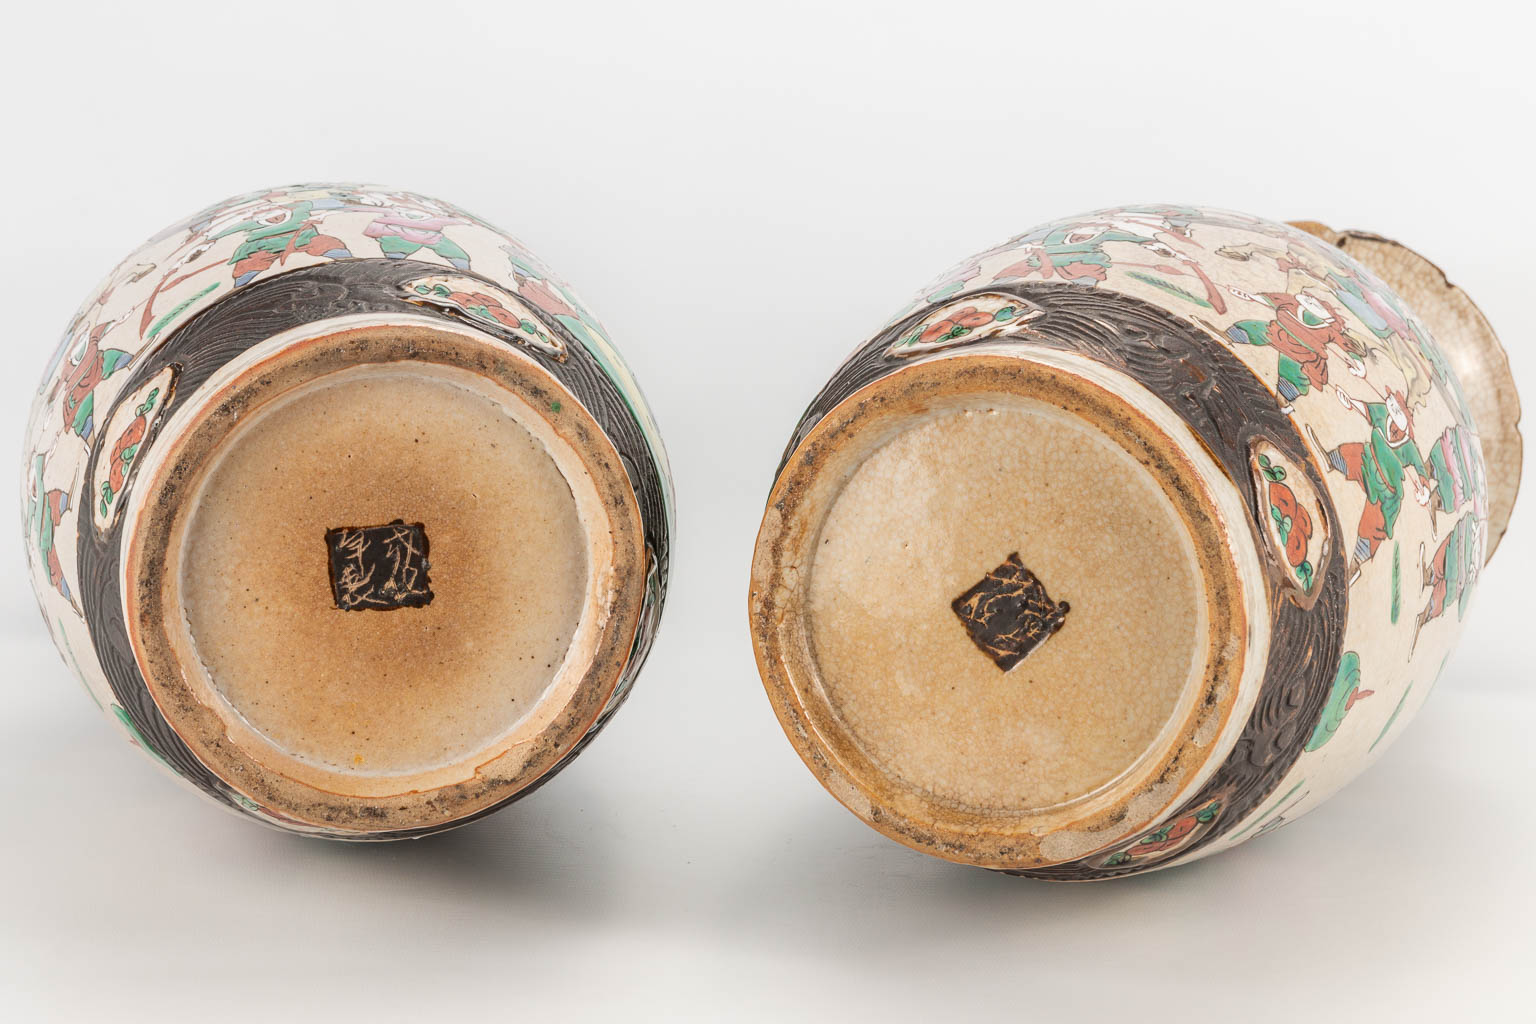 A pair of Nanking Chinese porcelain vases. (46 x 20 cm) - Image 11 of 25